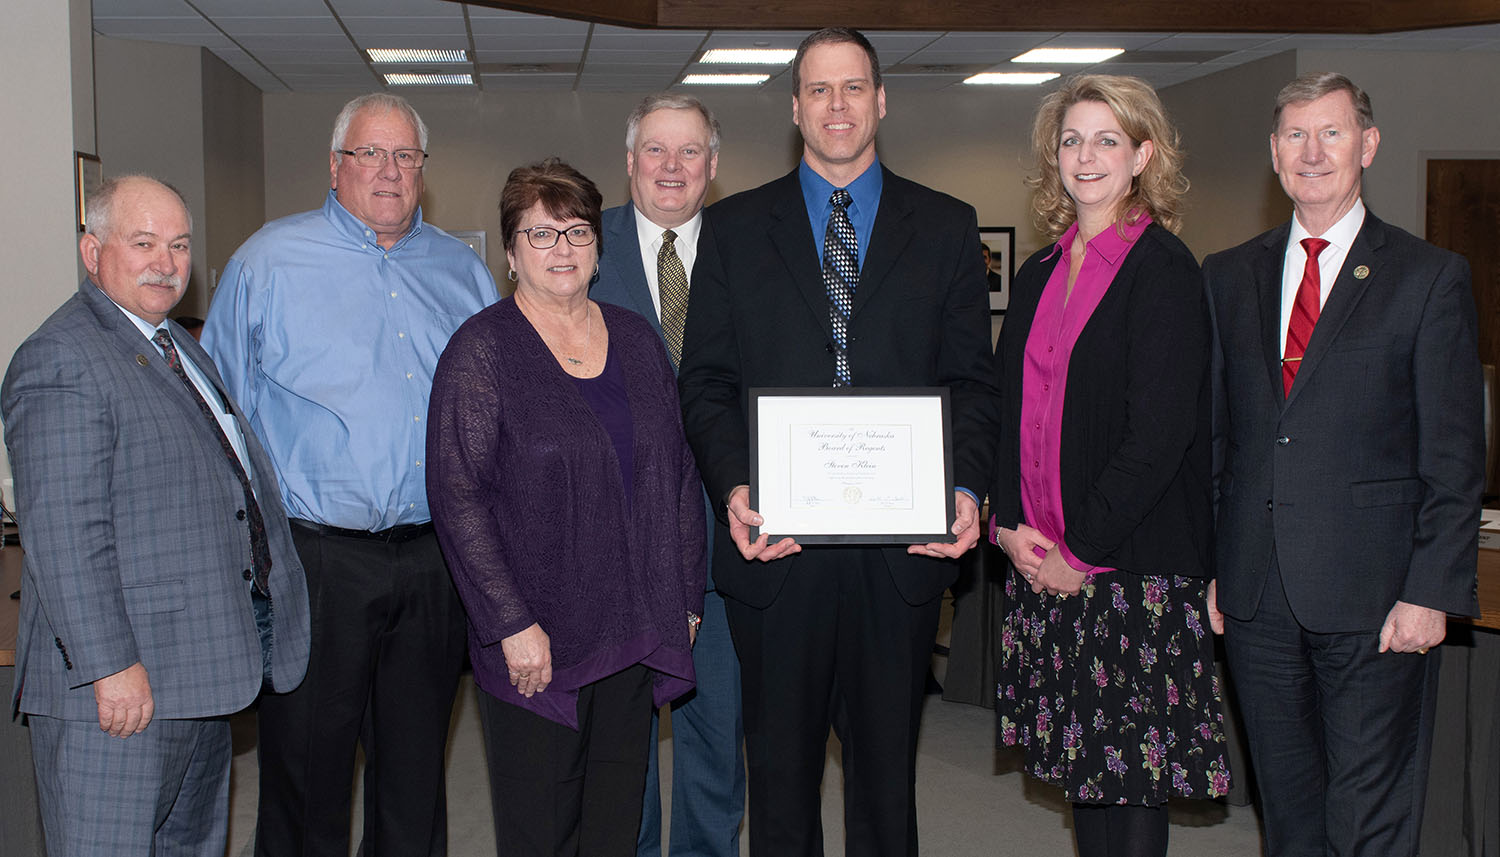 Steven Klein was recognized with the KUDOS award at last week's University of Nebraska Board of Regents meeting.